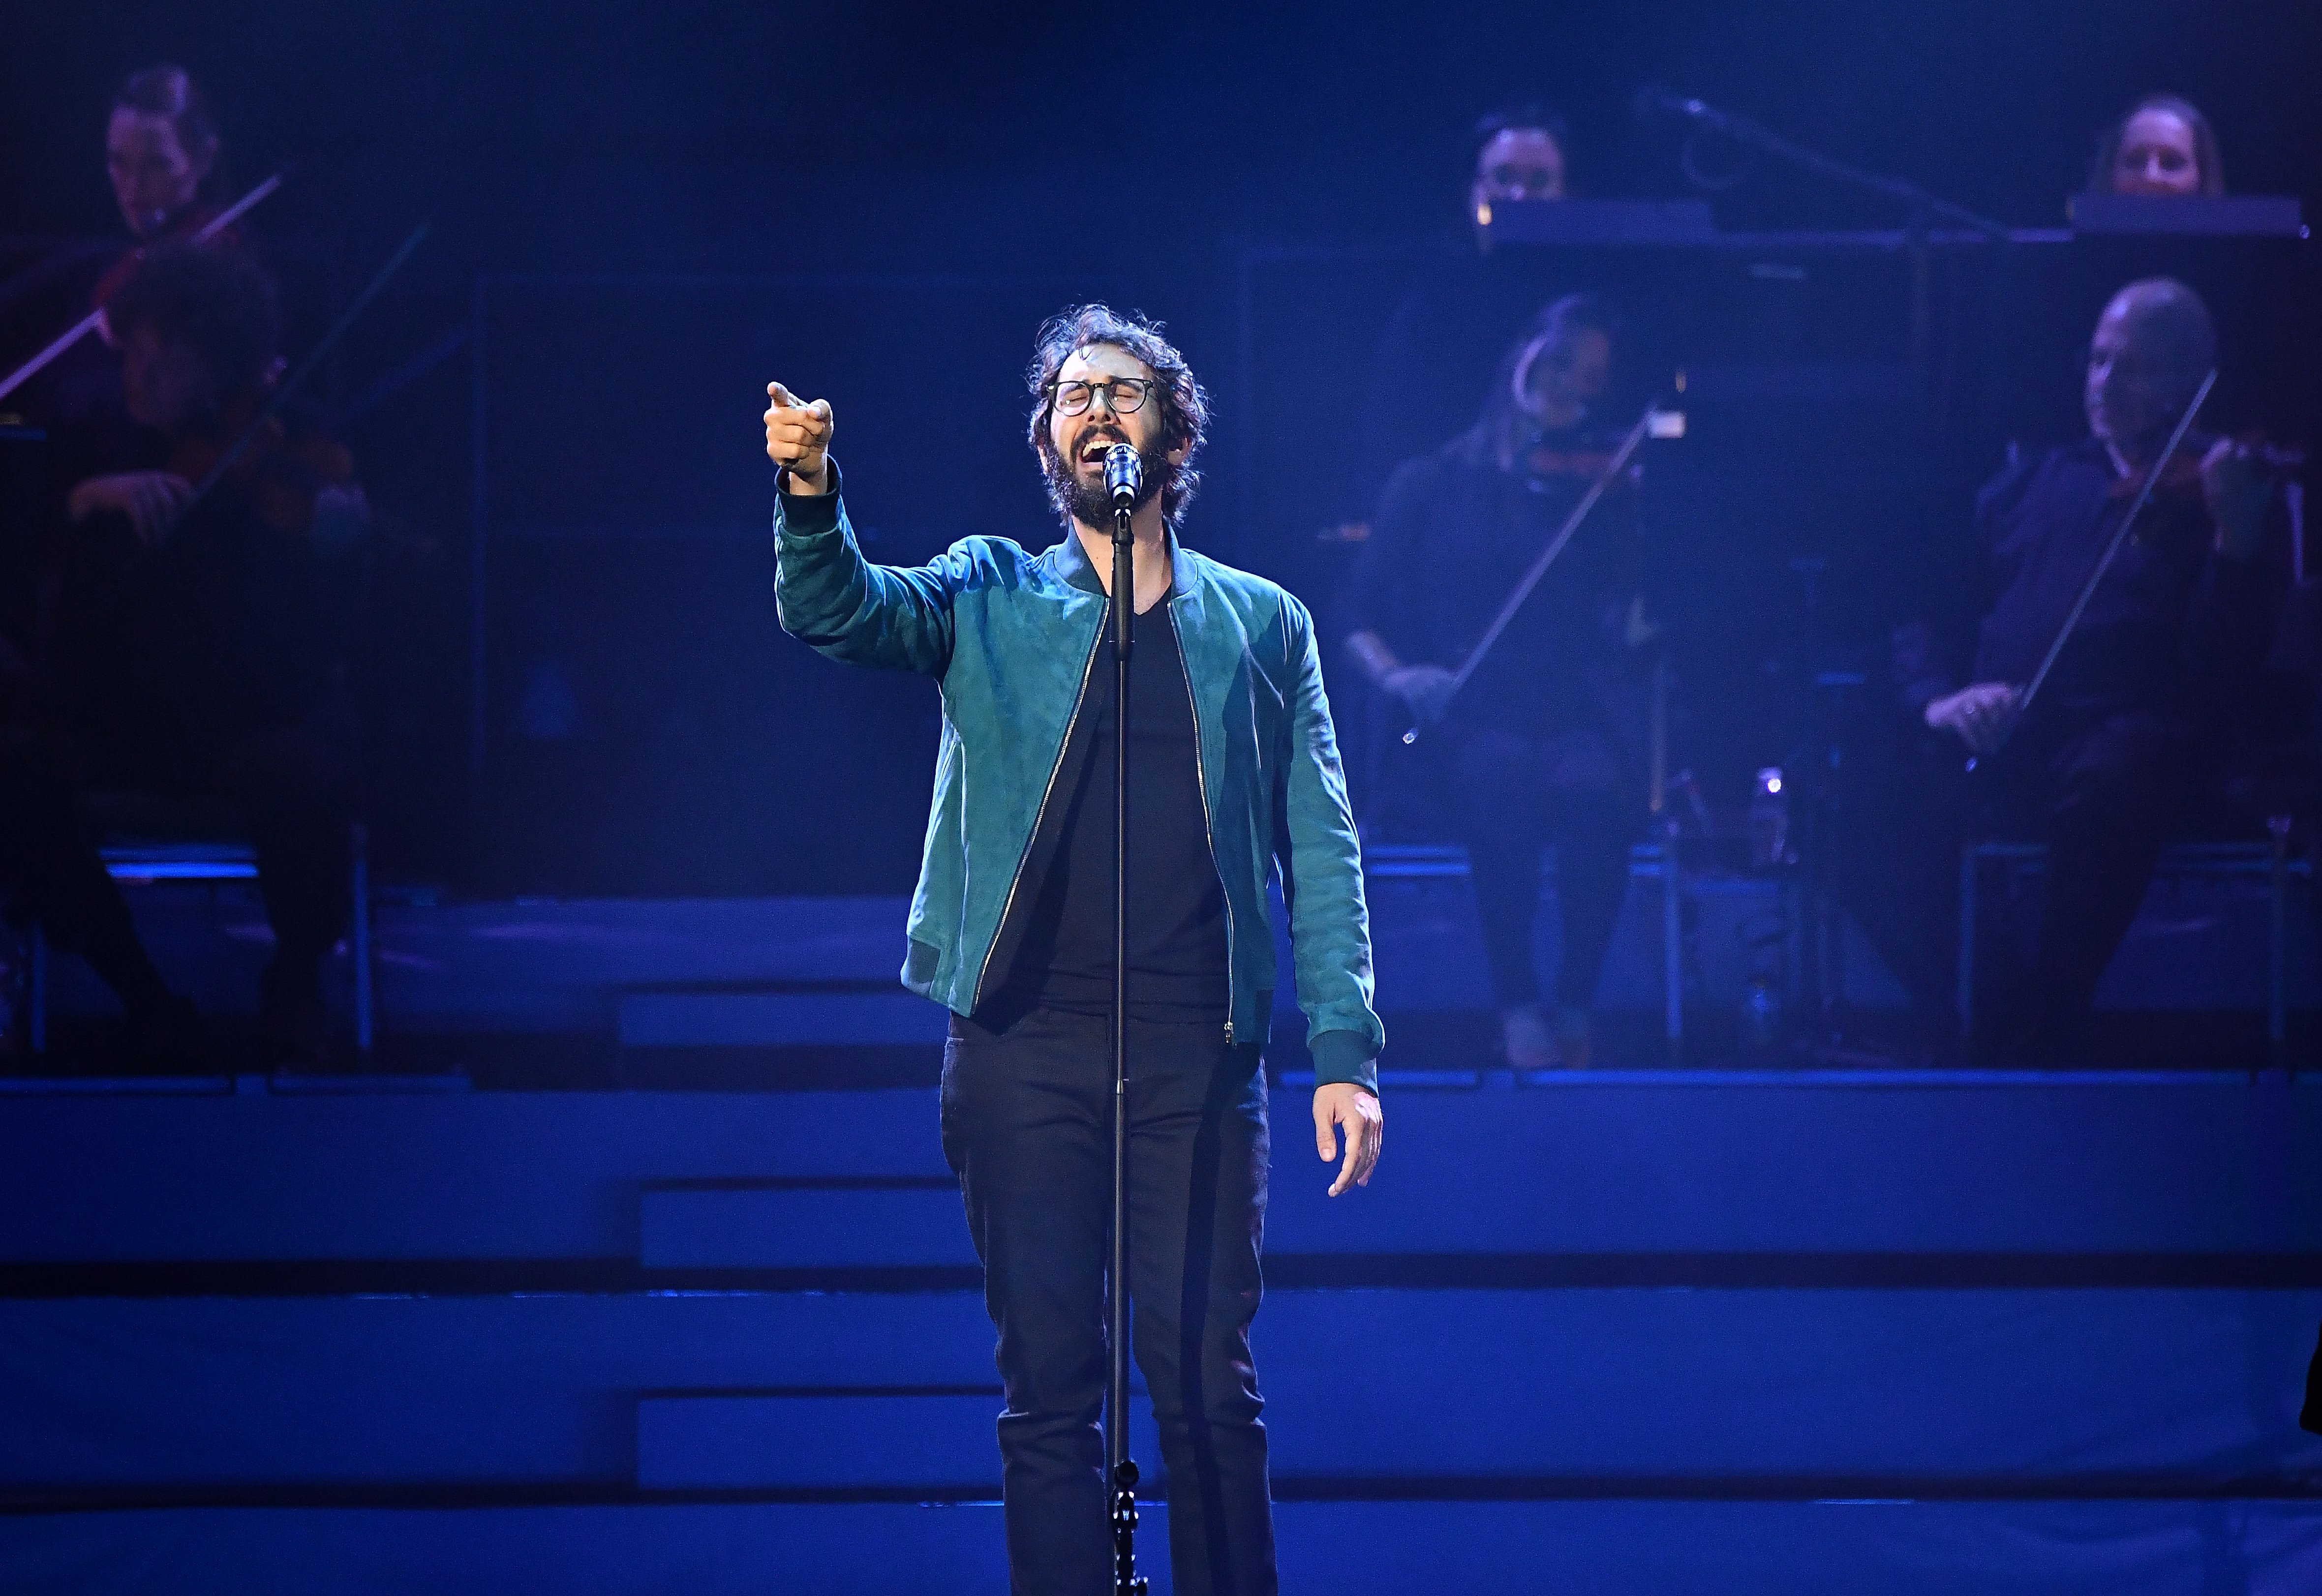  Josh Groban performs onstage during his "The Bridges" tour opener at Infinite Energy Arena on October 18, 2018 | Source: Getty Images